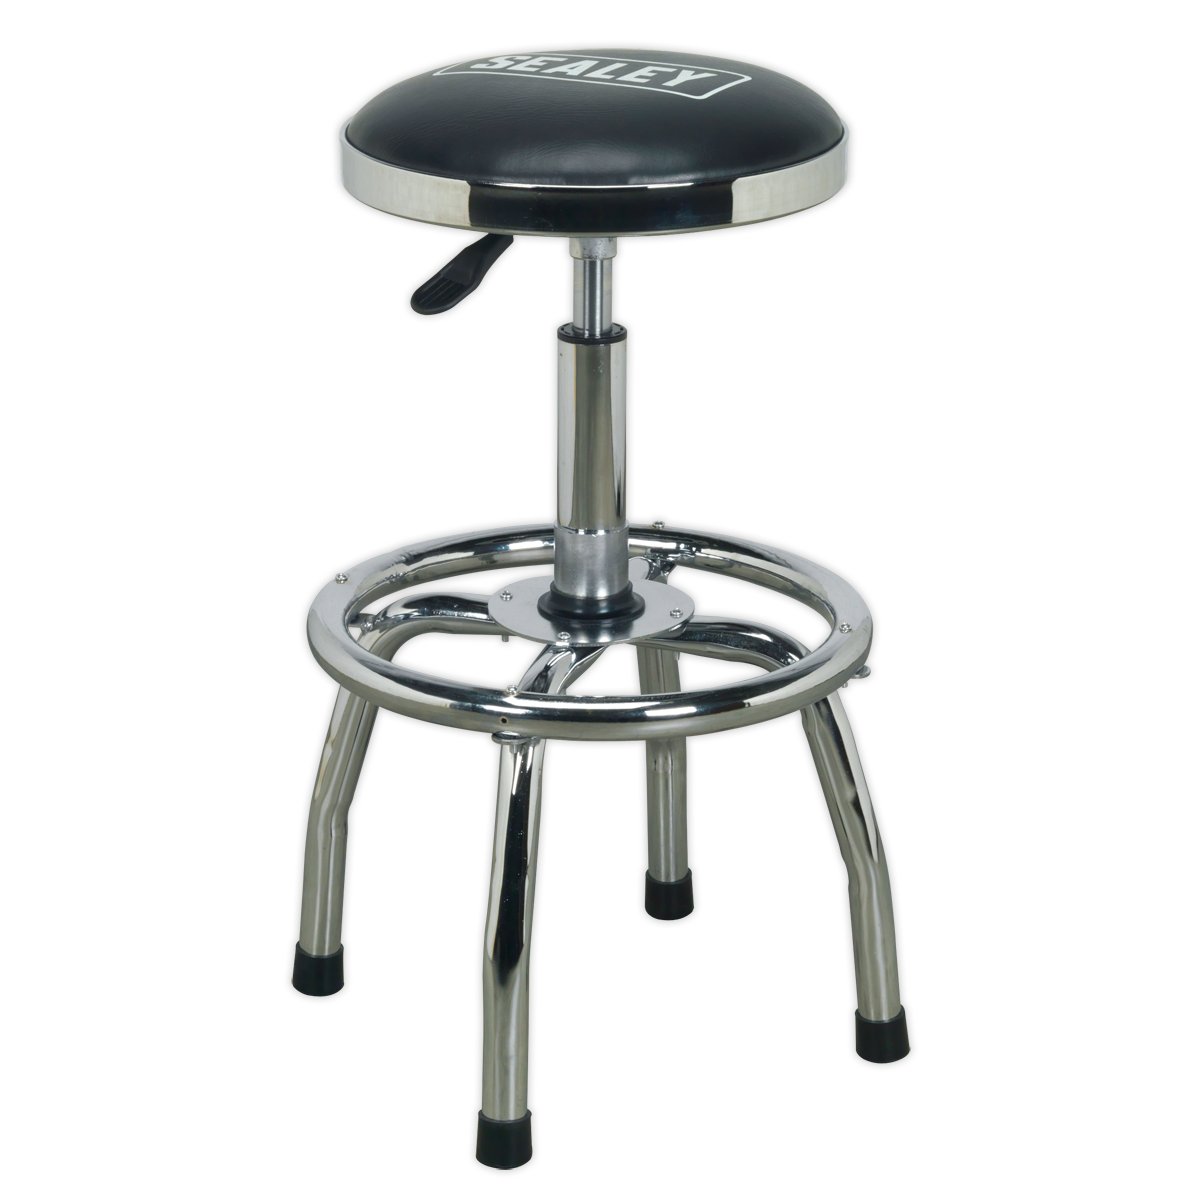 SEALEY - SCR17 Workshop Stool Heavy-Duty Pneumatic with Adjustable Height Swivel Seat